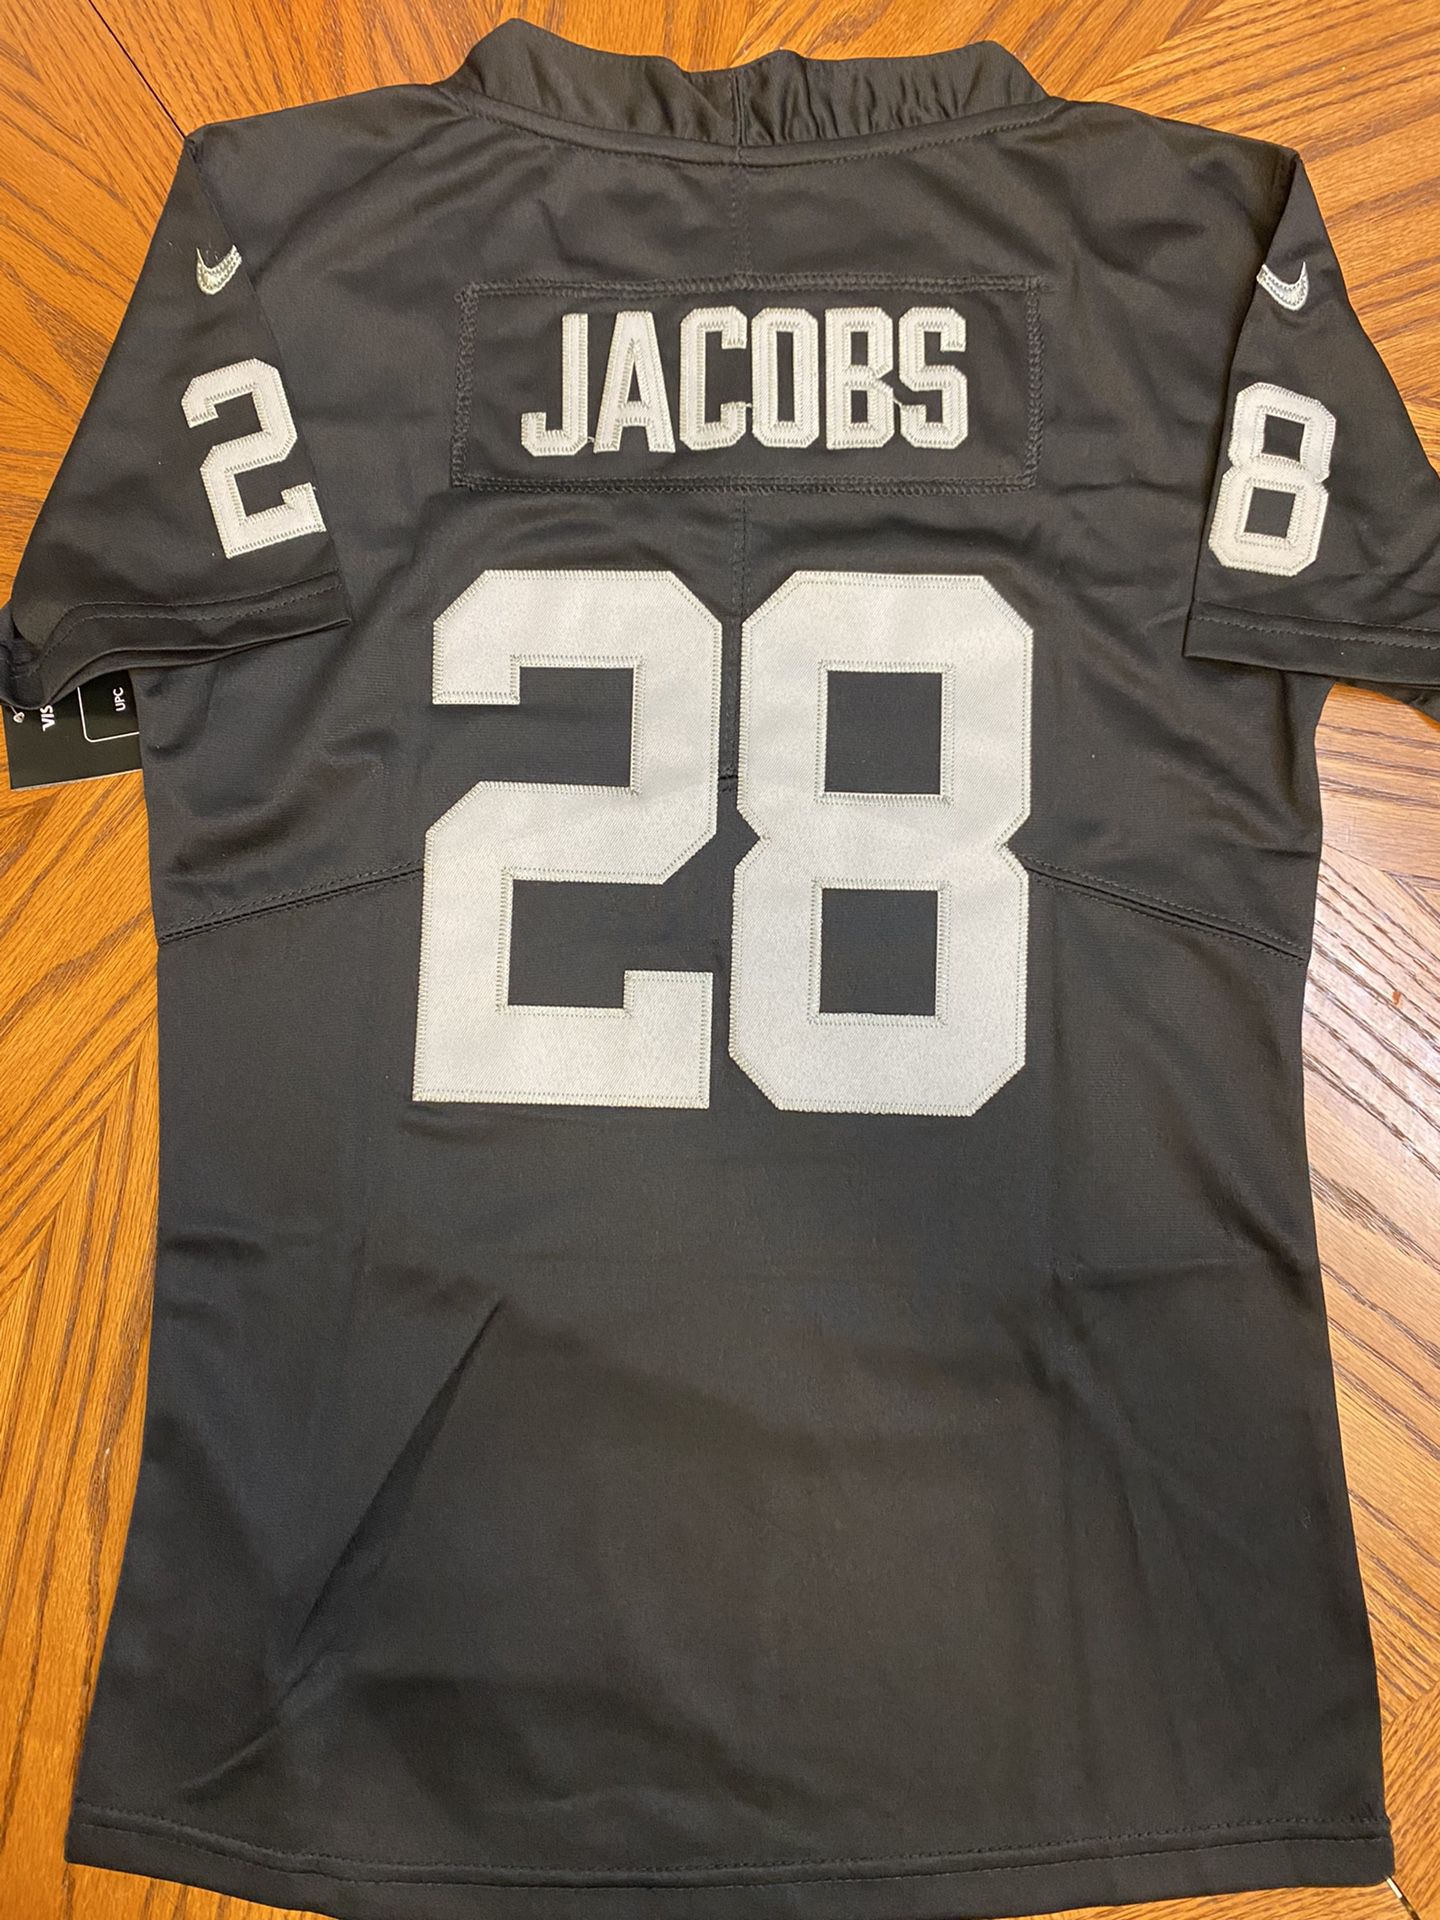 RAIDERS Jacobs Women Jersey Size Xtra Small Or Small